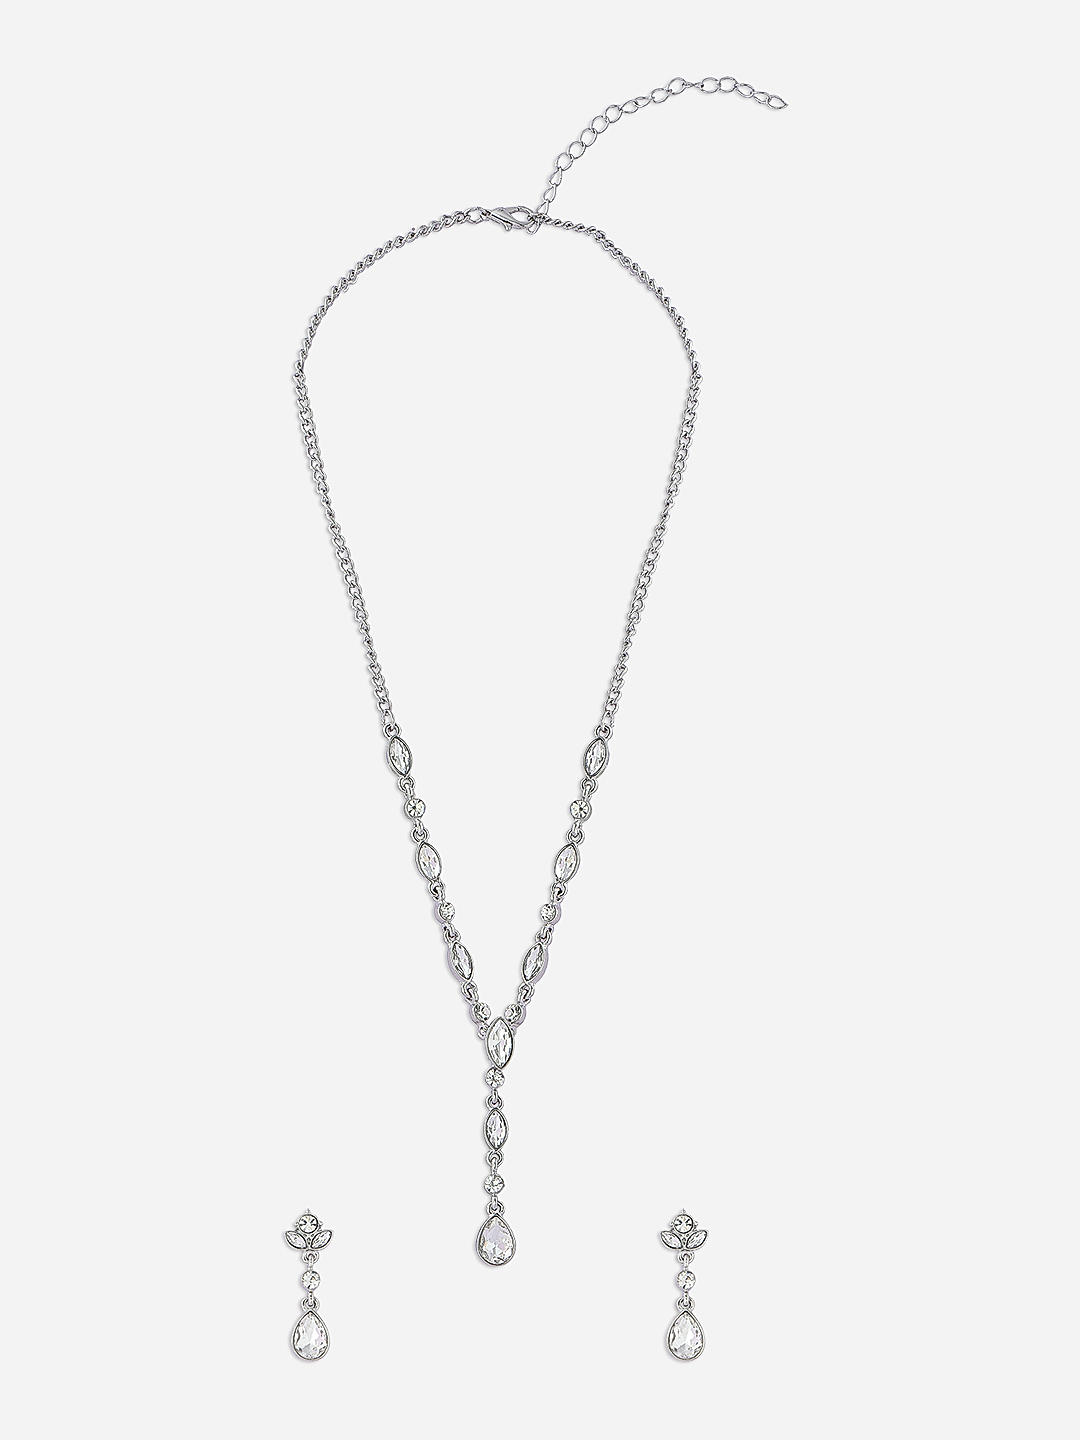 Buy Platinum Kids Names Necklace for Mom Christmas Grandma Solid Platinum  Necklace for Women Multi Multiple 1 2 3 4 5 6 Names Platinum Jewelry Online  in India - Etsy